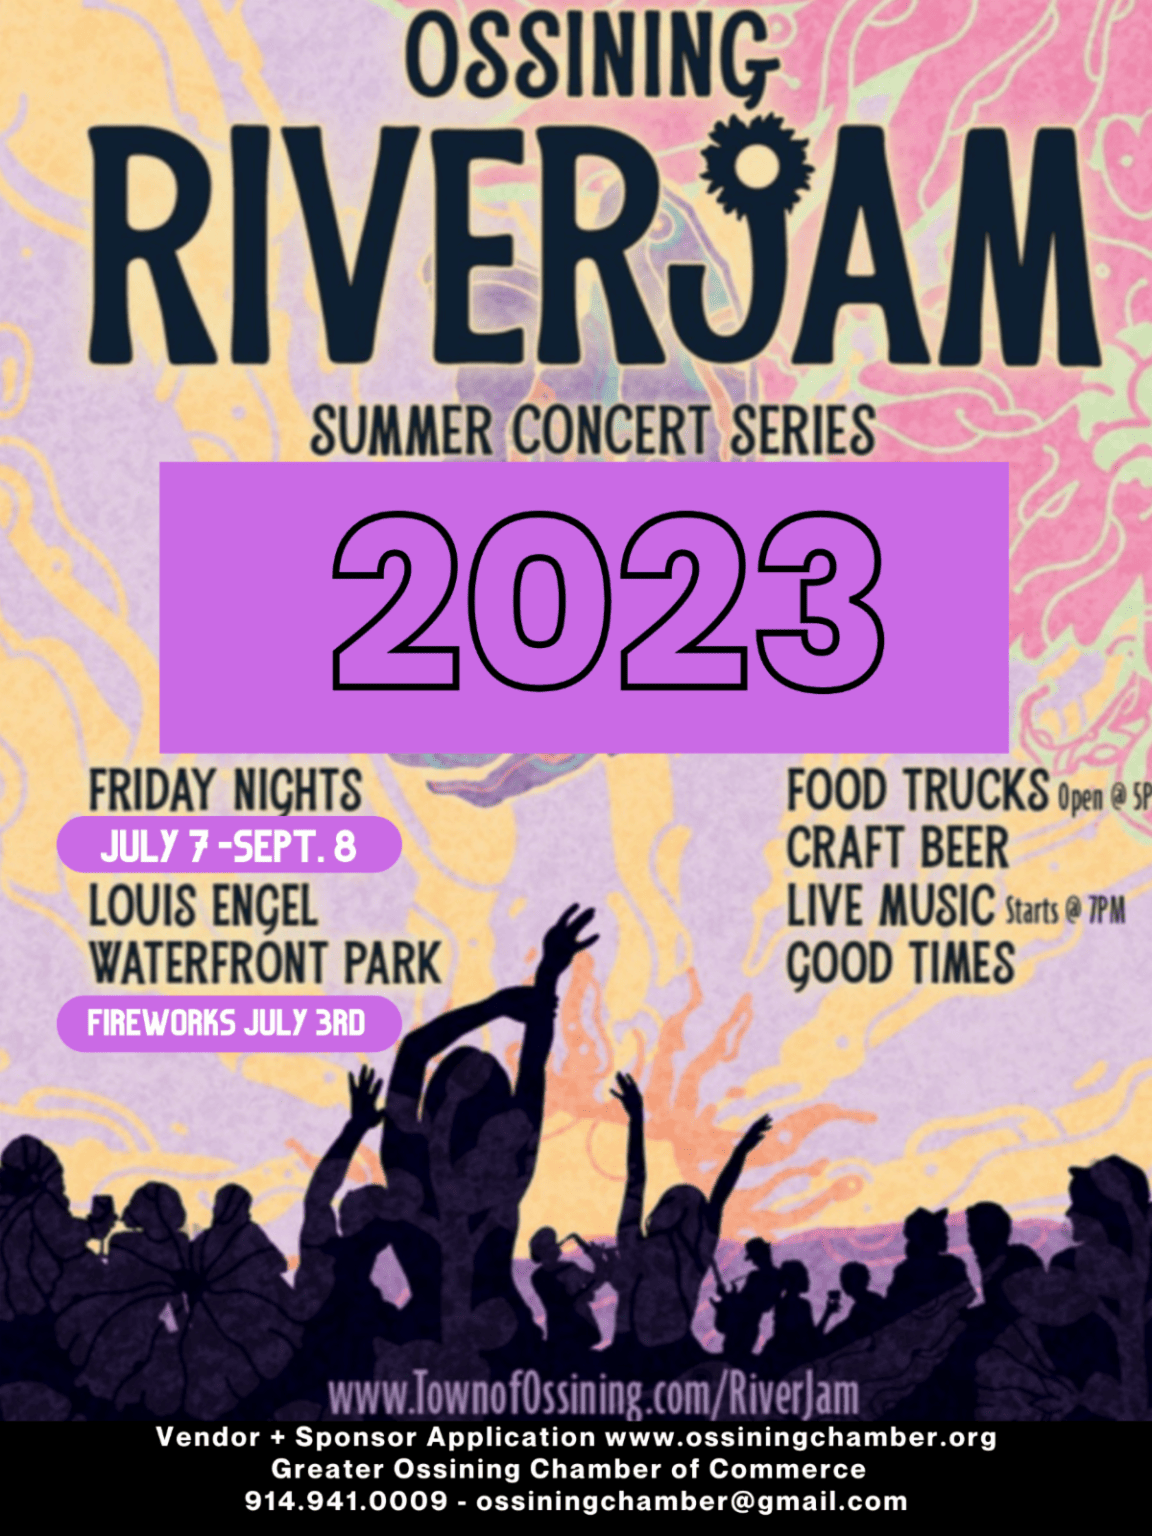 Ossining Waterfront Concerts 2022 RiverJam